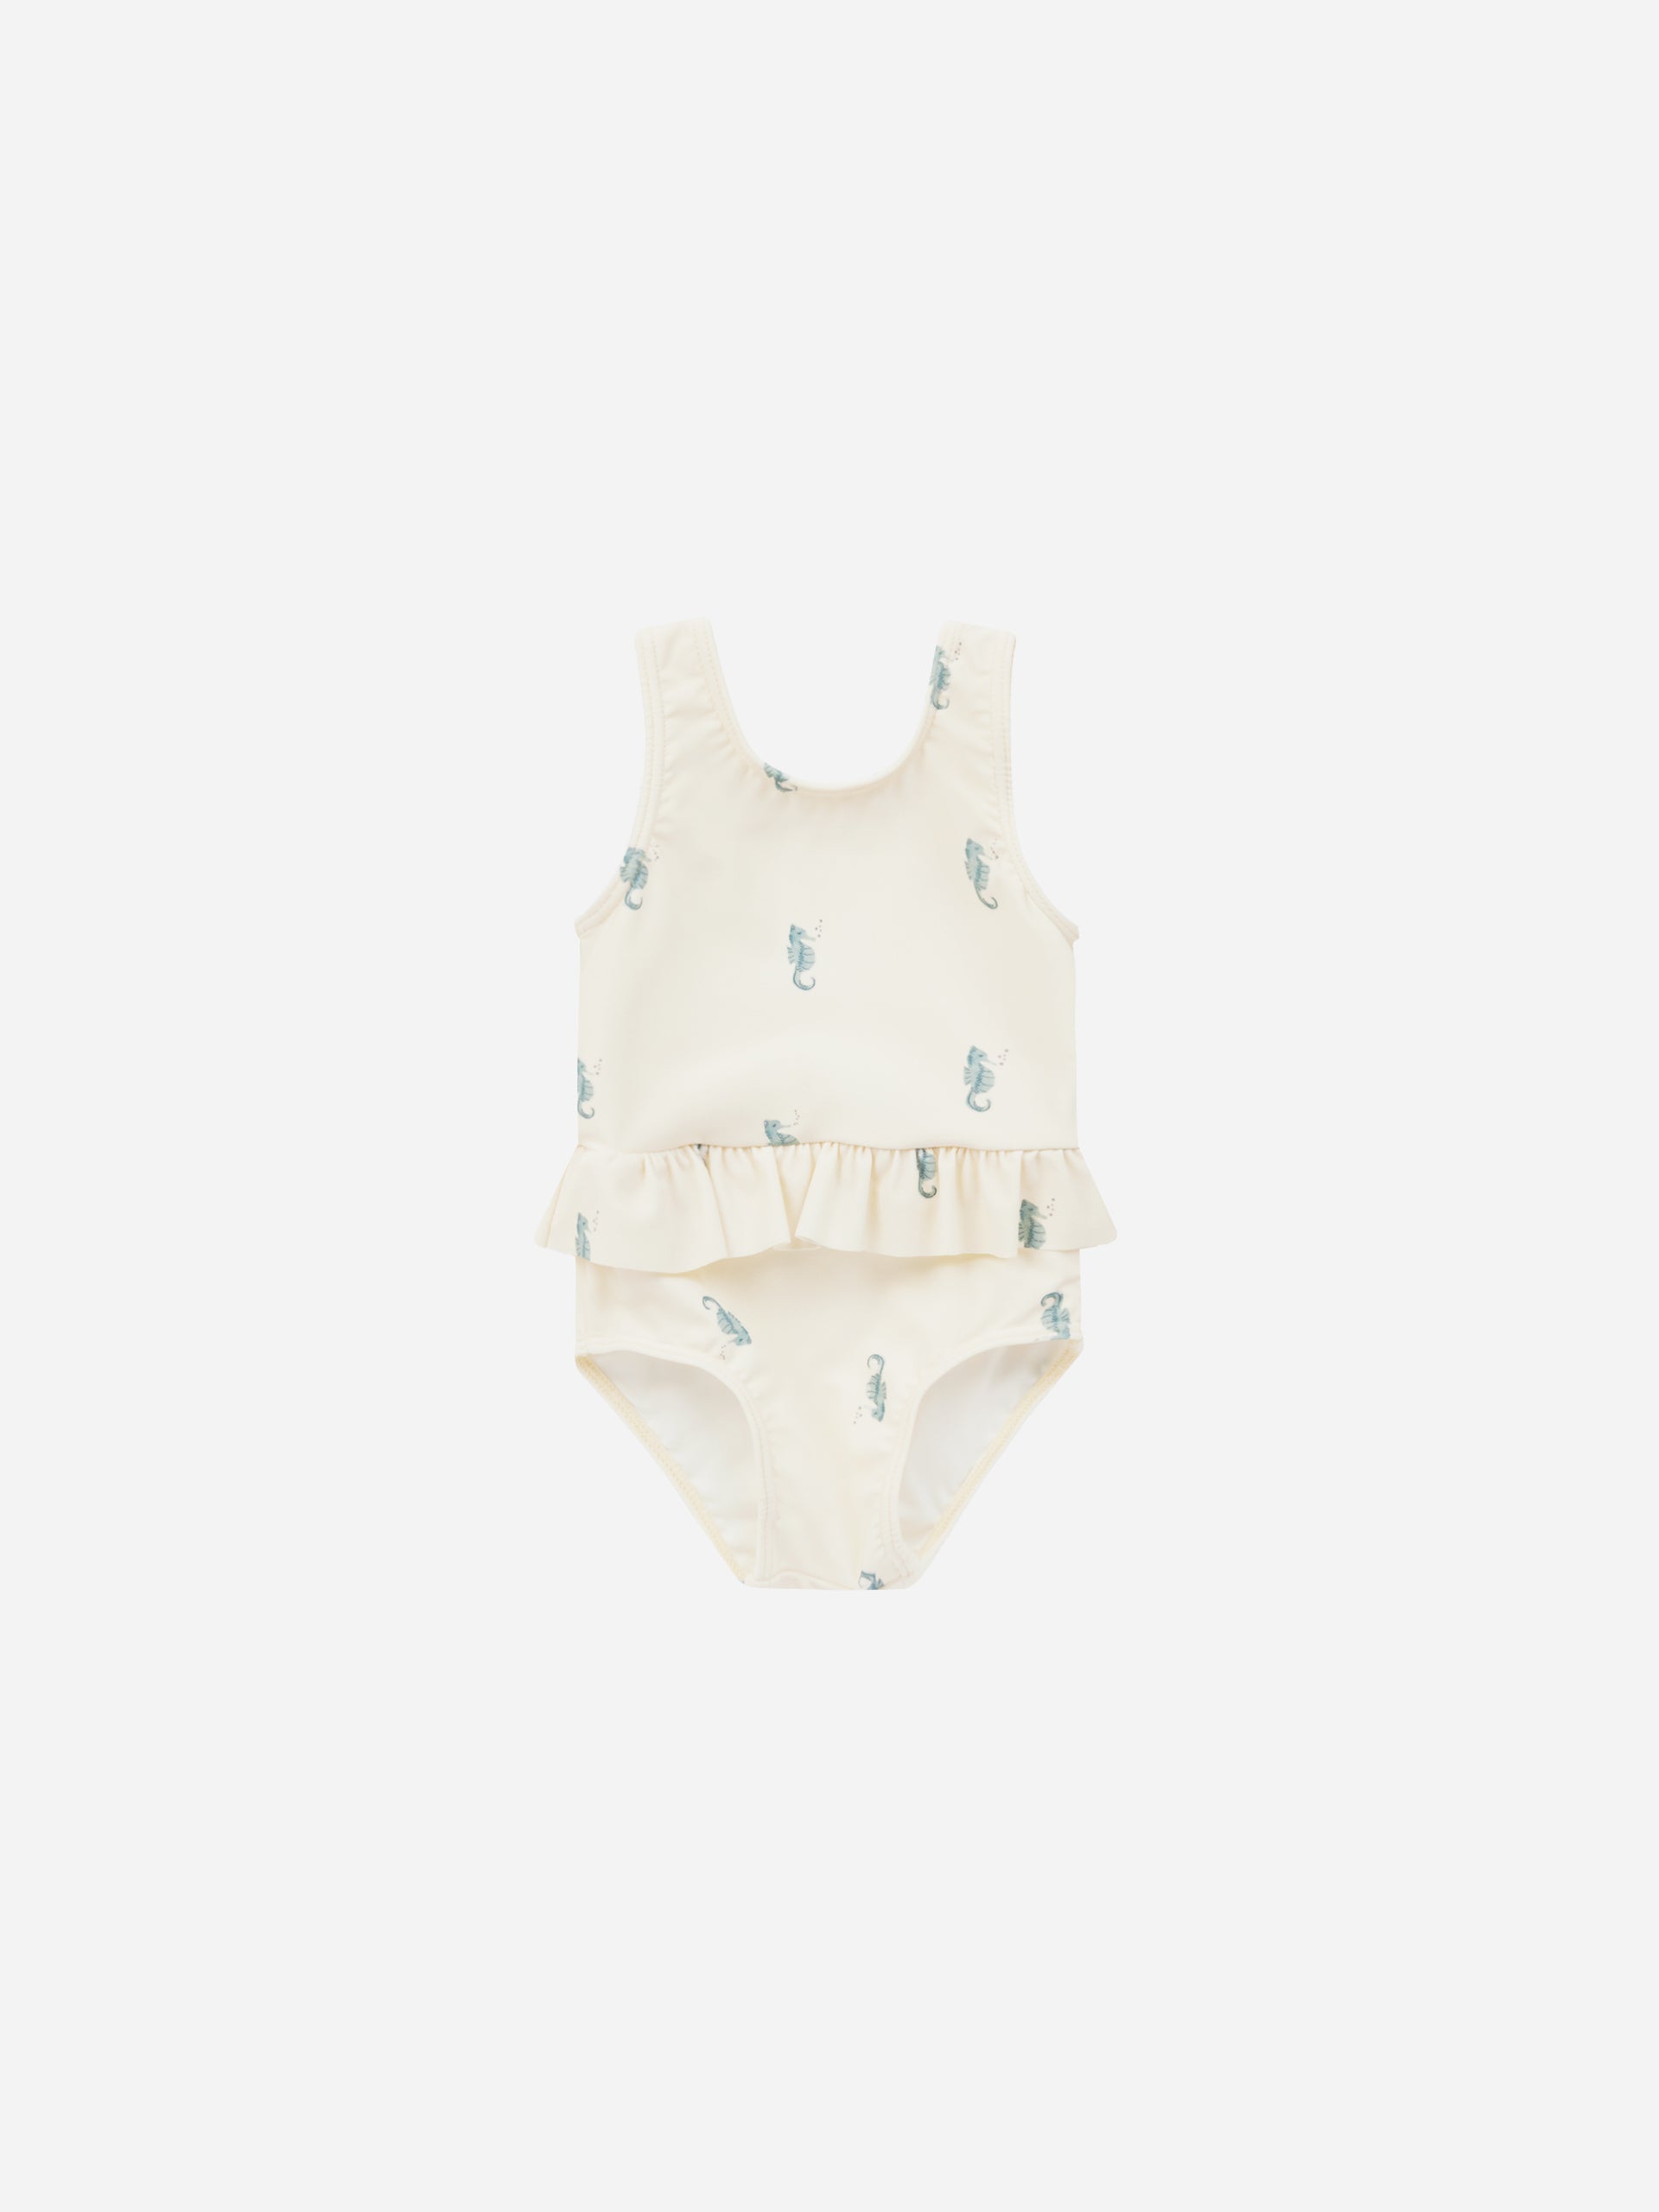 Skirted One-Piece || Seahorse - Rylee + Cru | Kids Clothes | Trendy Baby Clothes | Modern Infant Outfits |